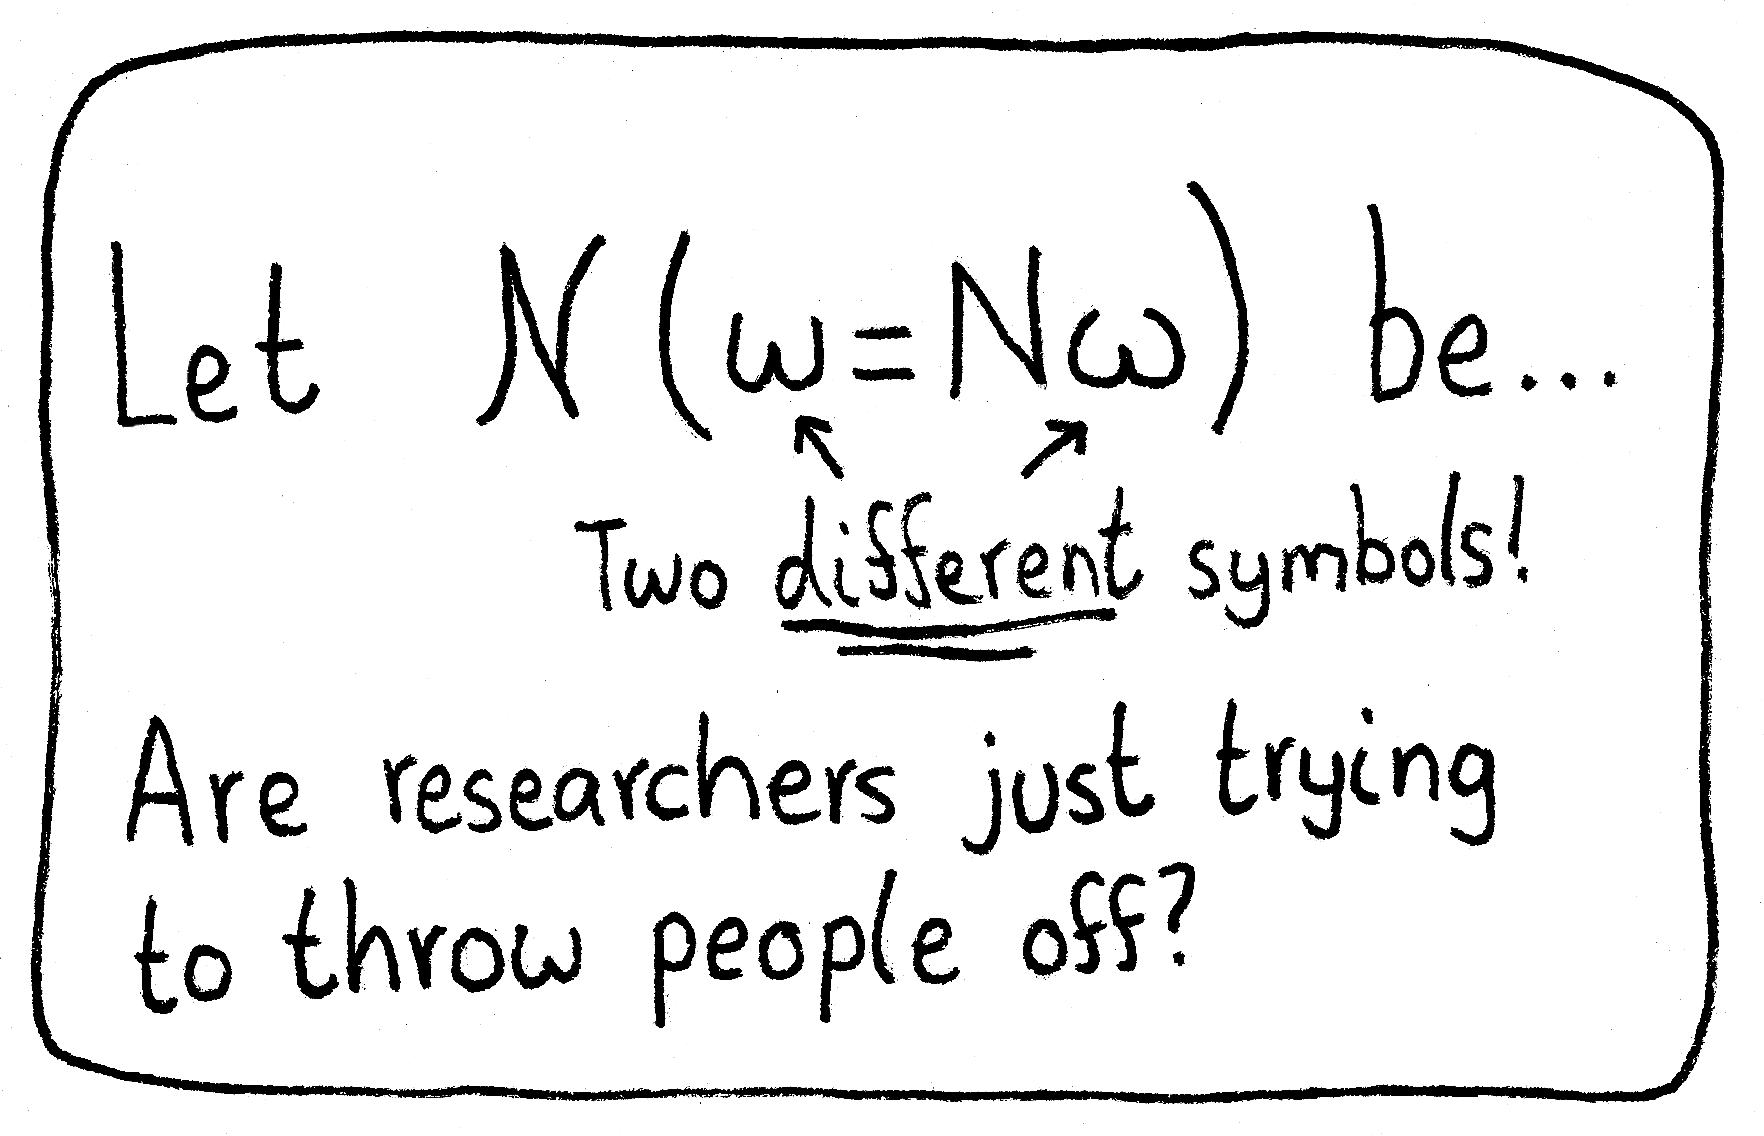 An excerpt of a textbook that says, "Let $\mathcal{N}(w = Nω)$ be...", and it's very unclear that w and ω are distinct symbols. Caption: Are researchers just trying to throw people off?